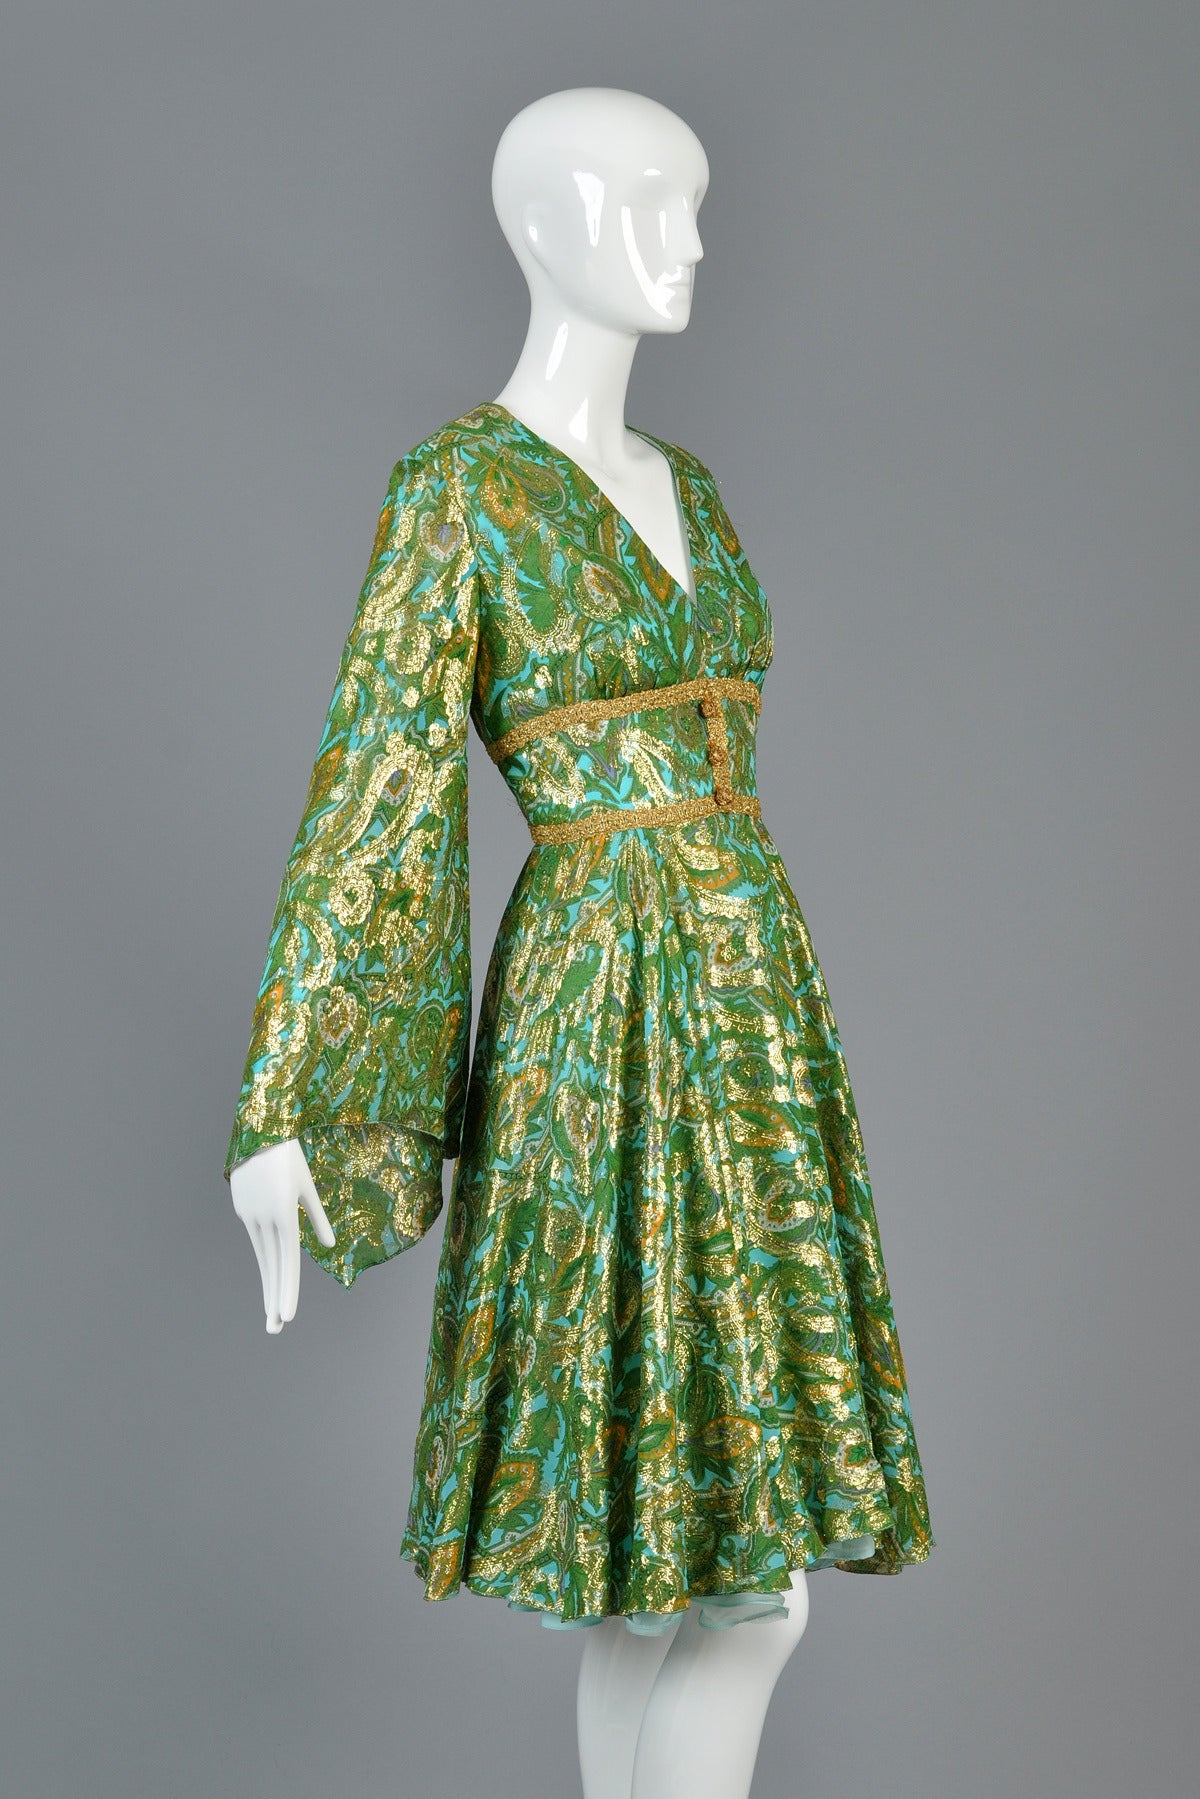 Absolutely lovely 1960s ethnic inspired dress by Roger Milot for Fred Perlberg.  Beautiful sky blue and emerald green metallic silk brocade dress. The PERFECT piece for any spring event! Plunging neckline with fitted bodice, flared skirt and huge